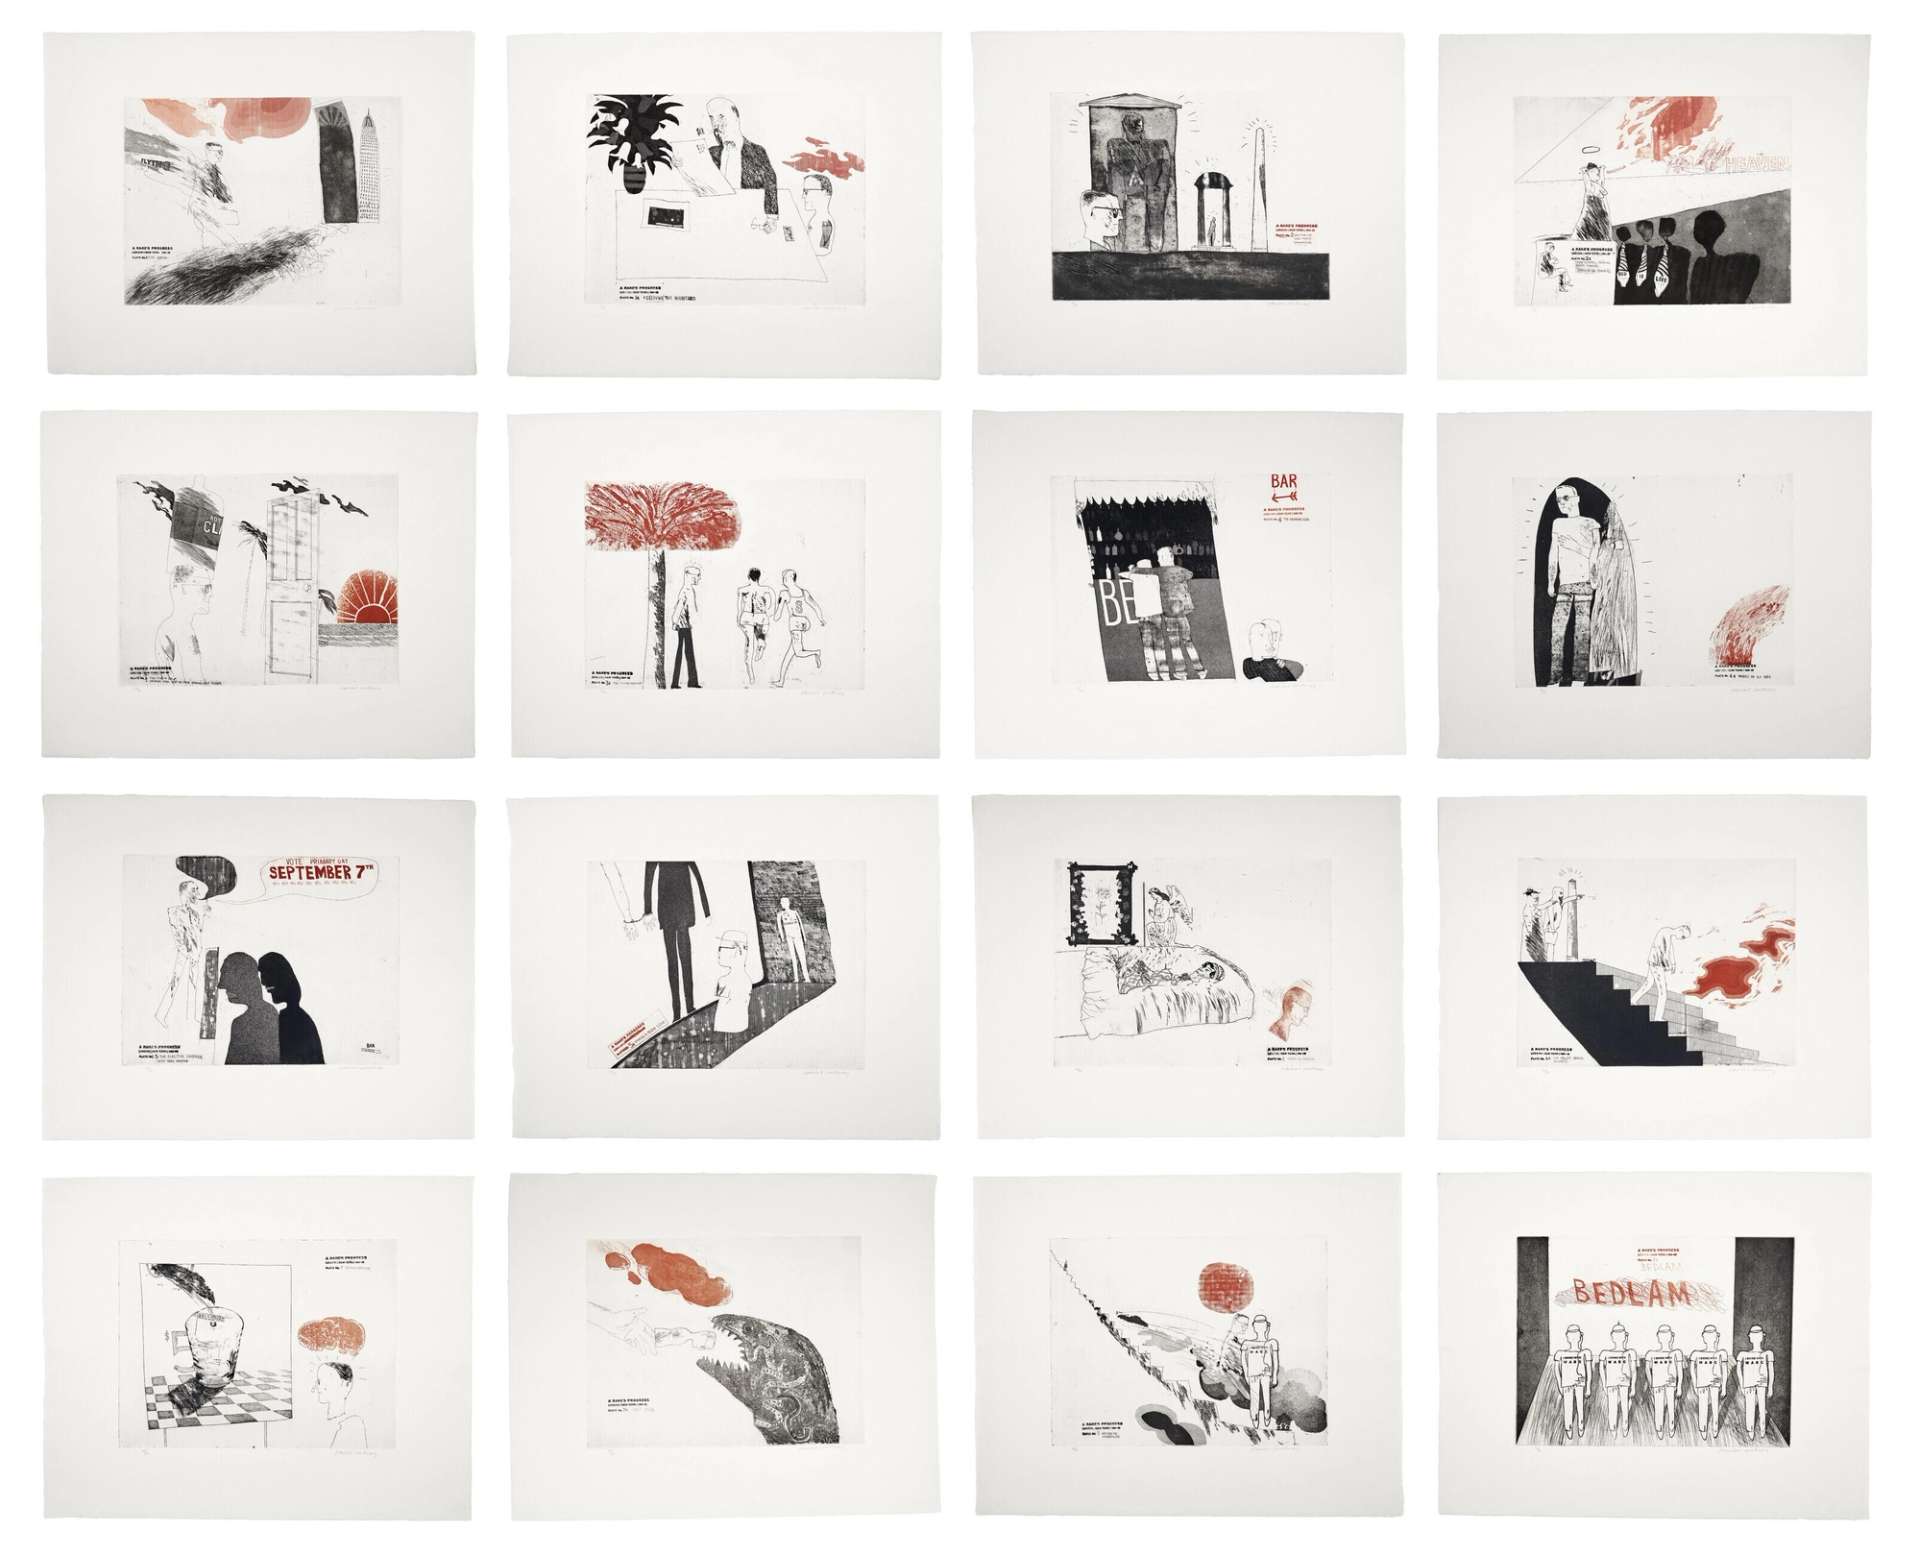 A complete set of David Hockney etching in monochrome and red ink.